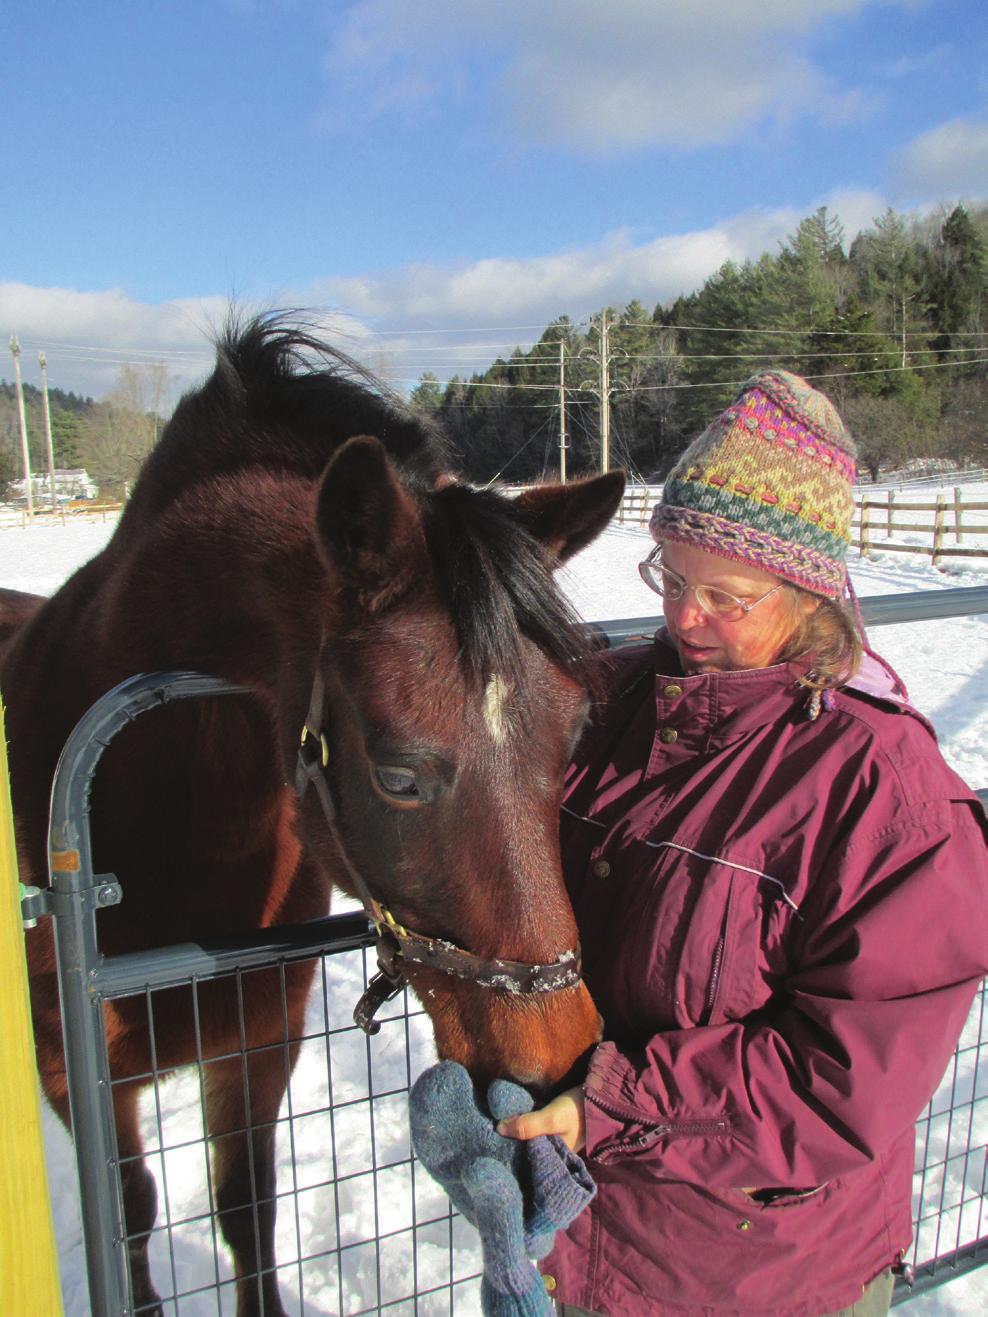 Love of horses and love of reading about them went hand-in-hand for me from early childhood, says Jessie. She lives with her husband, children s writer Michael J.